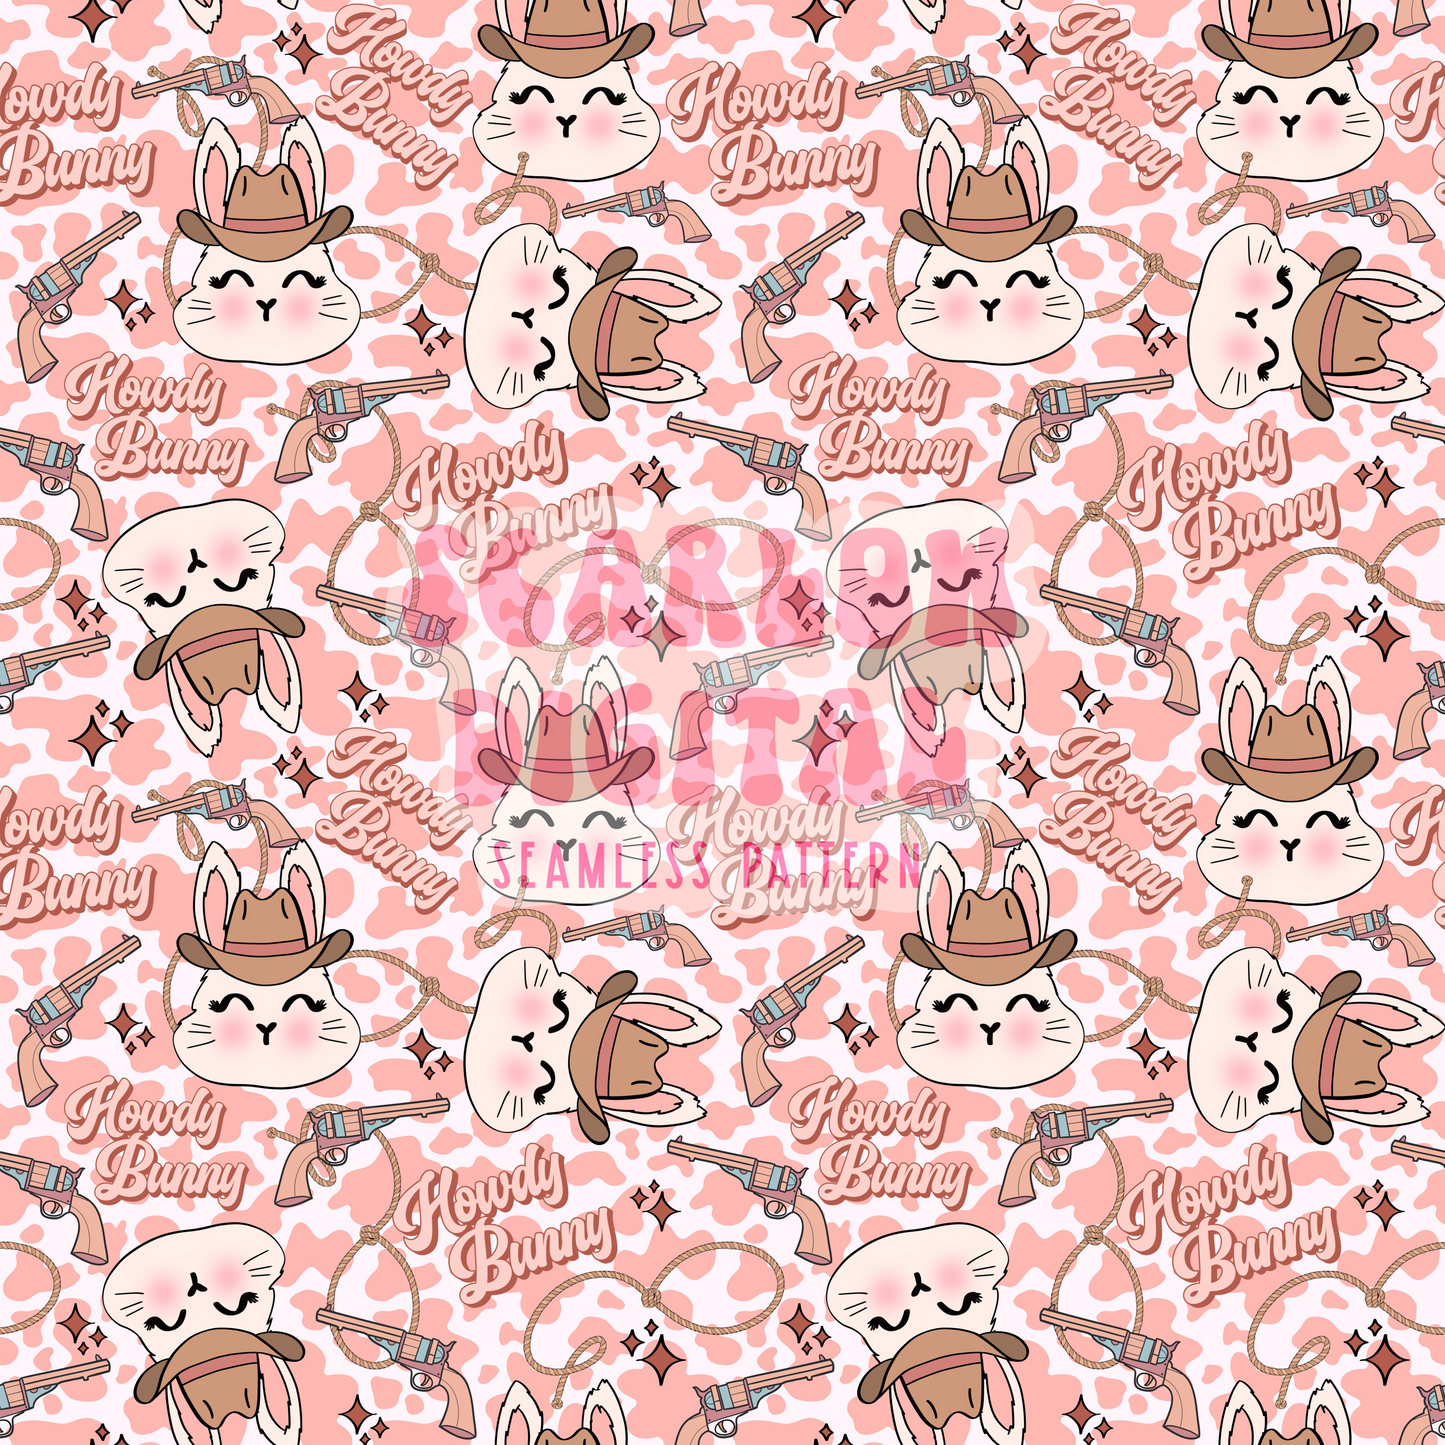 Howdy Bunny Seamless Pattern-Easter Sublimation Digital Design Download-western seamless pattern, cowgirl seamless file, girl easter seamless